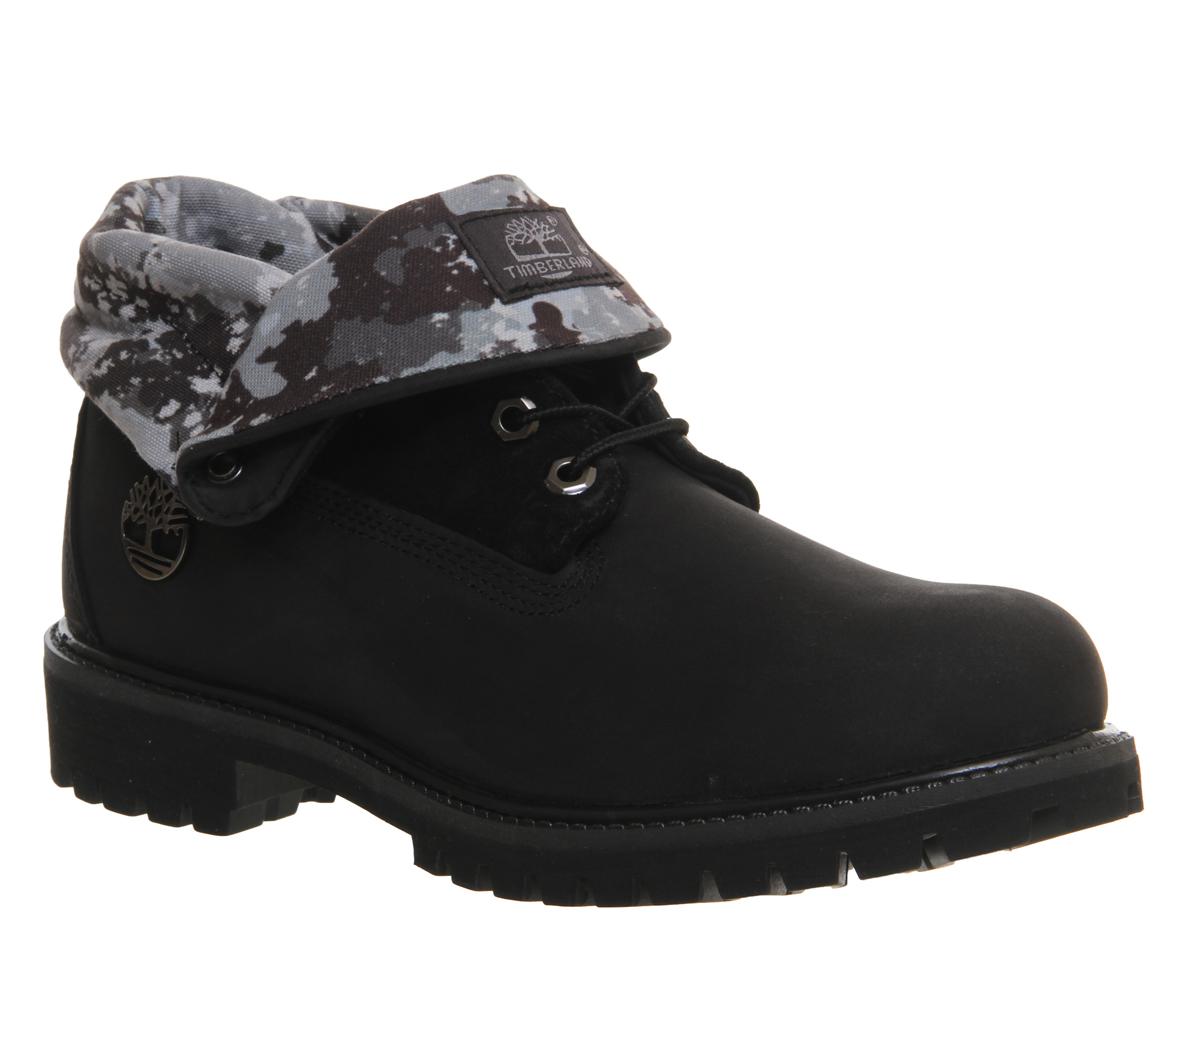 Timberland Suede Roll Top Boots in Black Camo (Black) for Men - Lyst